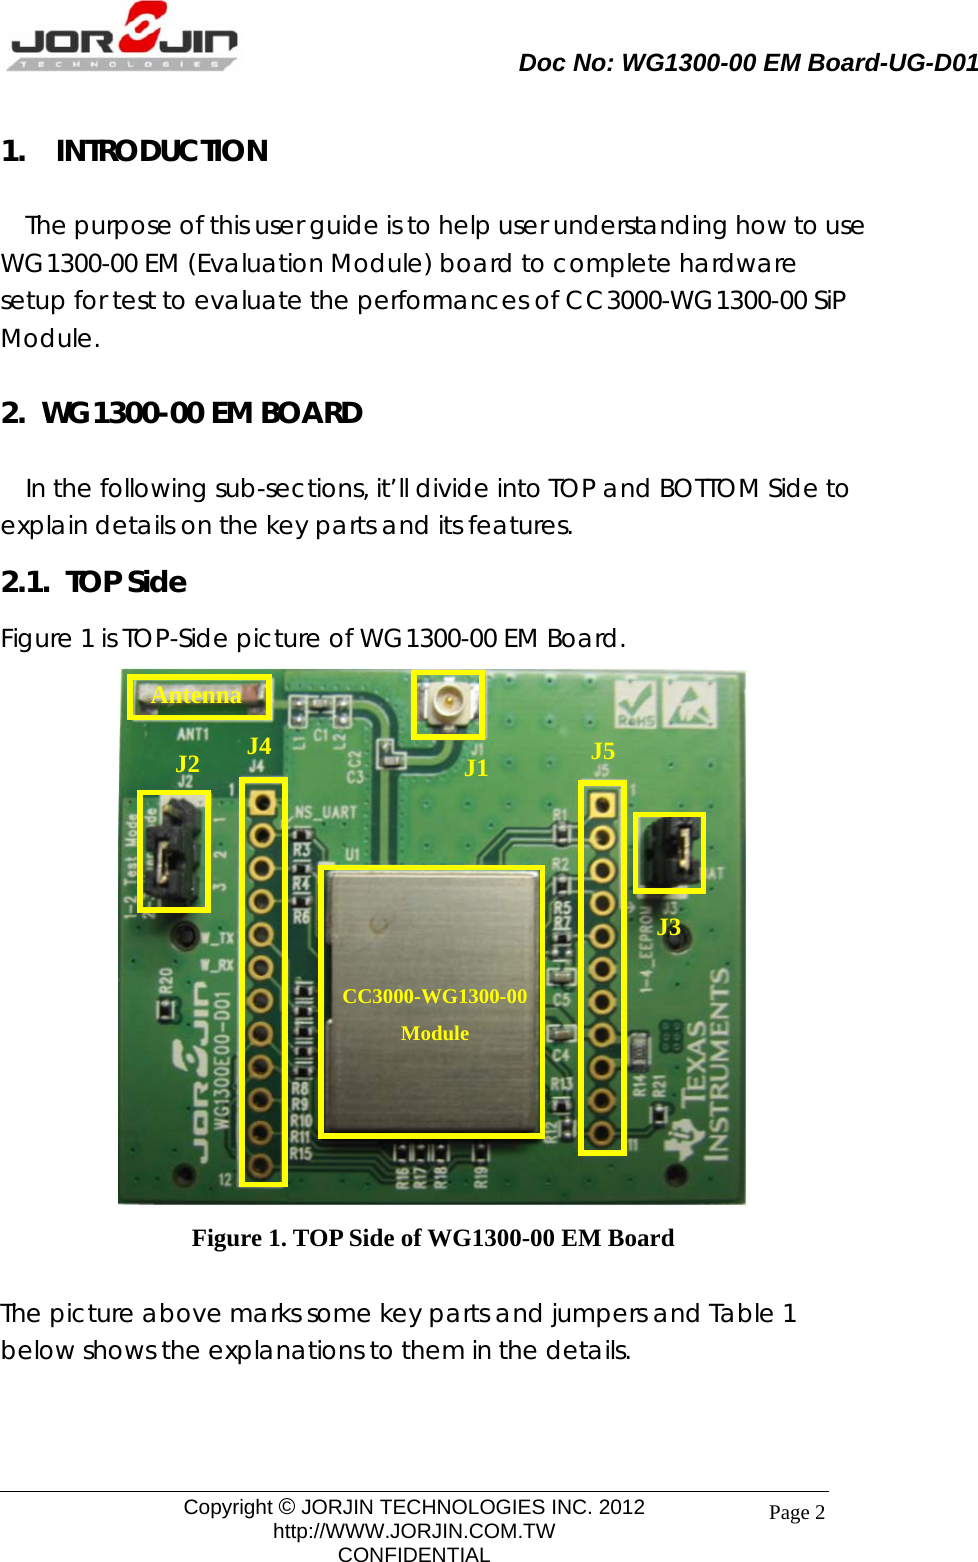                       Doc No: WG1300-00 EM Board-UG-D01                                                                                        Copyright © JORJIN TECHNOLOGIES INC. 2012 http://WWW.JORJIN.COM.TW CONFIDENTIAL Page 21.   INTRODUCTION     The purpose of this user guide is to help user understanding how to use WG1300-00 EM (Evaluation Module) board to complete hardware setup for test to evaluate the performances of CC3000-WG1300-00 SiP Module.  2.  WG1300-00 EM BOARD   In the following sub-sections, it’ll divide into TOP and BOTTOM Side to explain details on the key parts and its features.   2.1.  TOP Side Figure 1 is TOP-Side picture of WG1300-00 EM Board.  Figure 1. TOP Side of WG1300-00 EM Board  The picture above marks some key parts and jumpers and Table 1 below shows the explanations to them in the details.   J3J2  J5J4  J1Antenna CC3000-WG1300-00 Module 